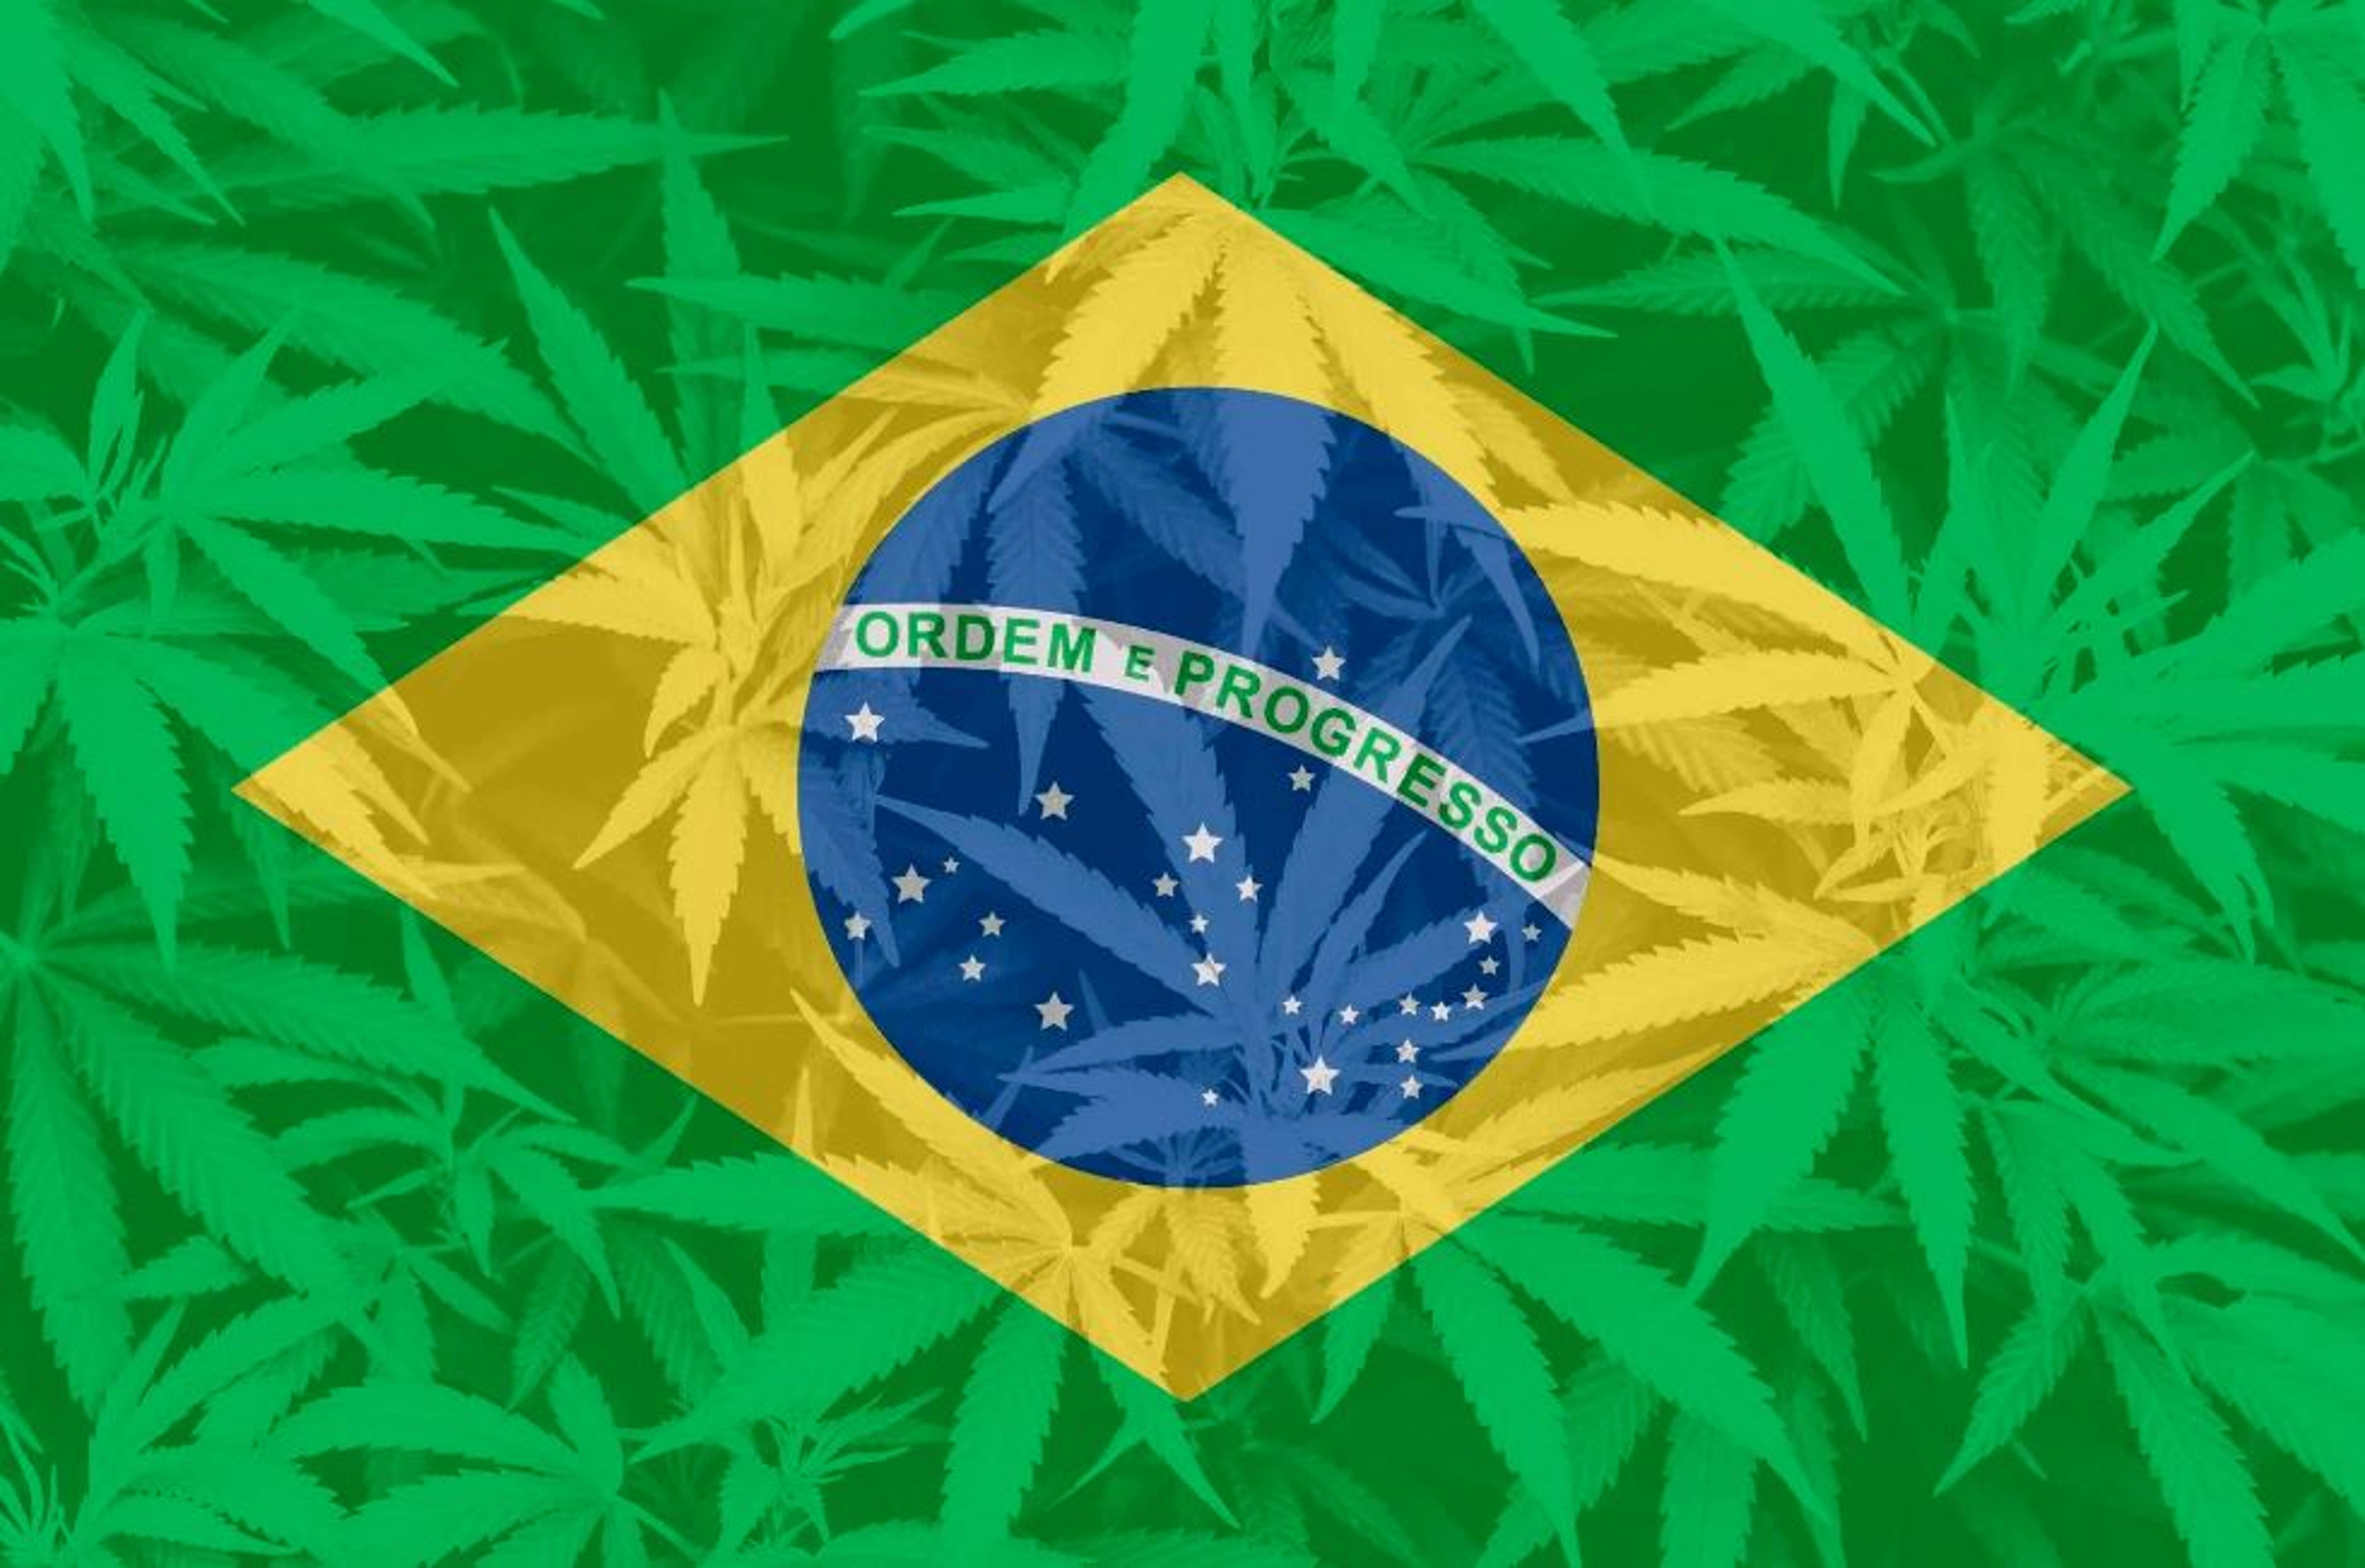 BREAKING: Brazil Supreme Court Authorizes Citizens To Grow Medicinal Cannabis